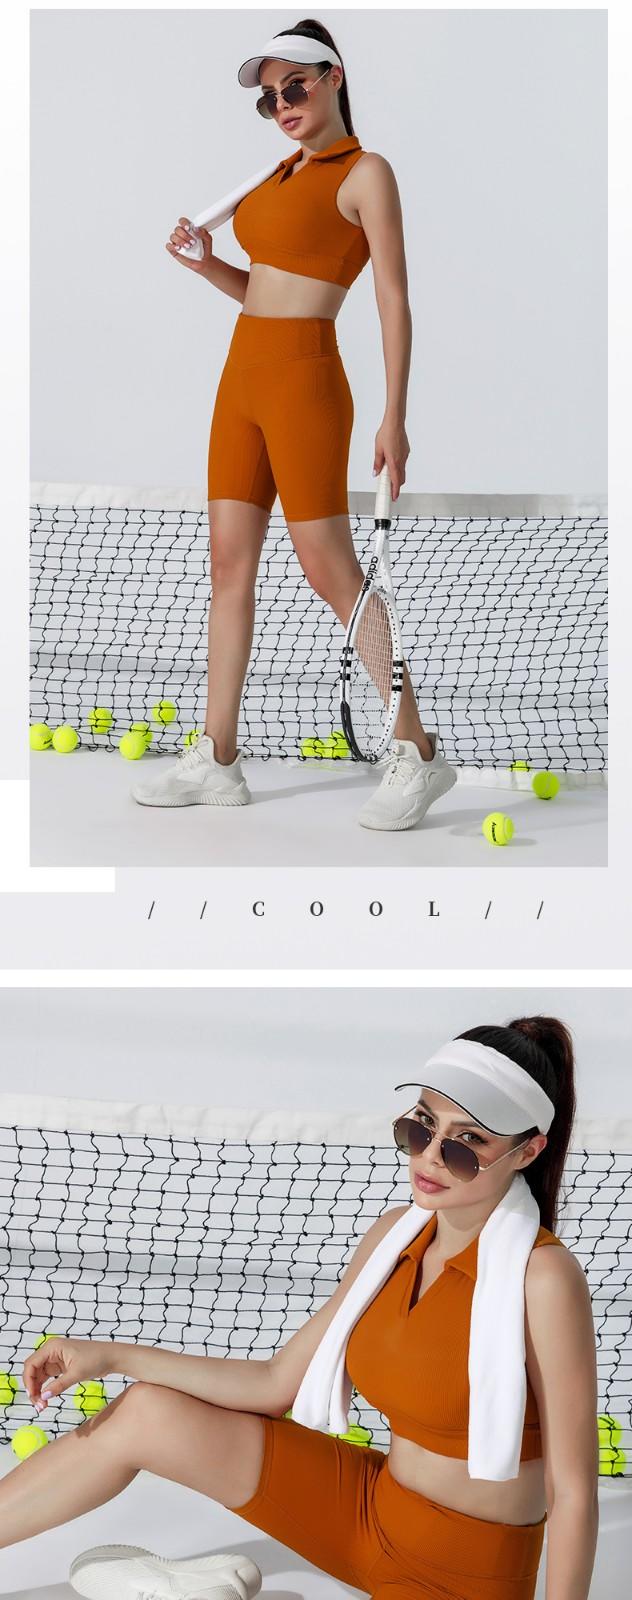 personalized women's tennis outfits owner for girls